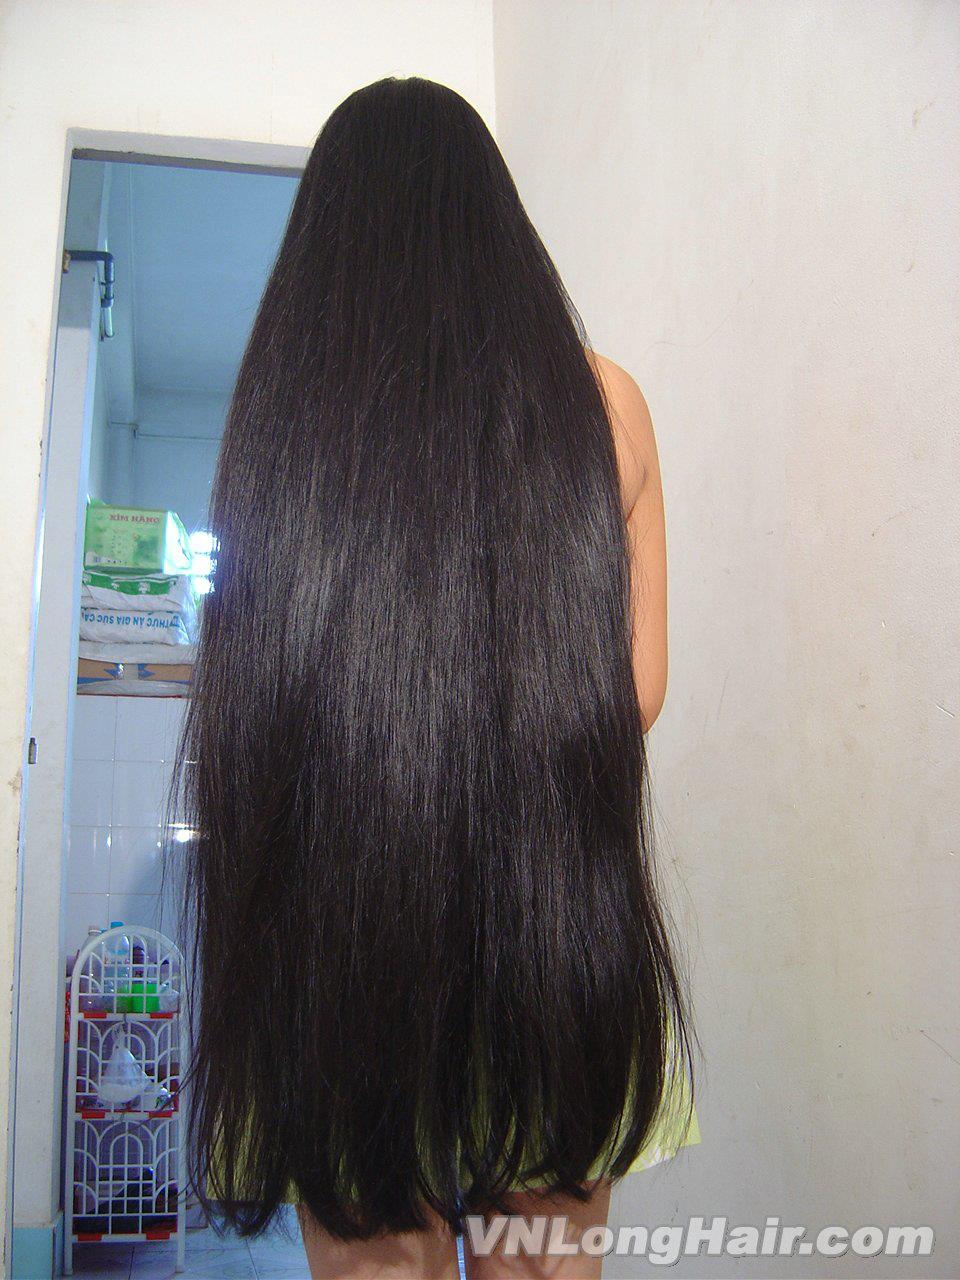 Indian Long Hair Site March 2012